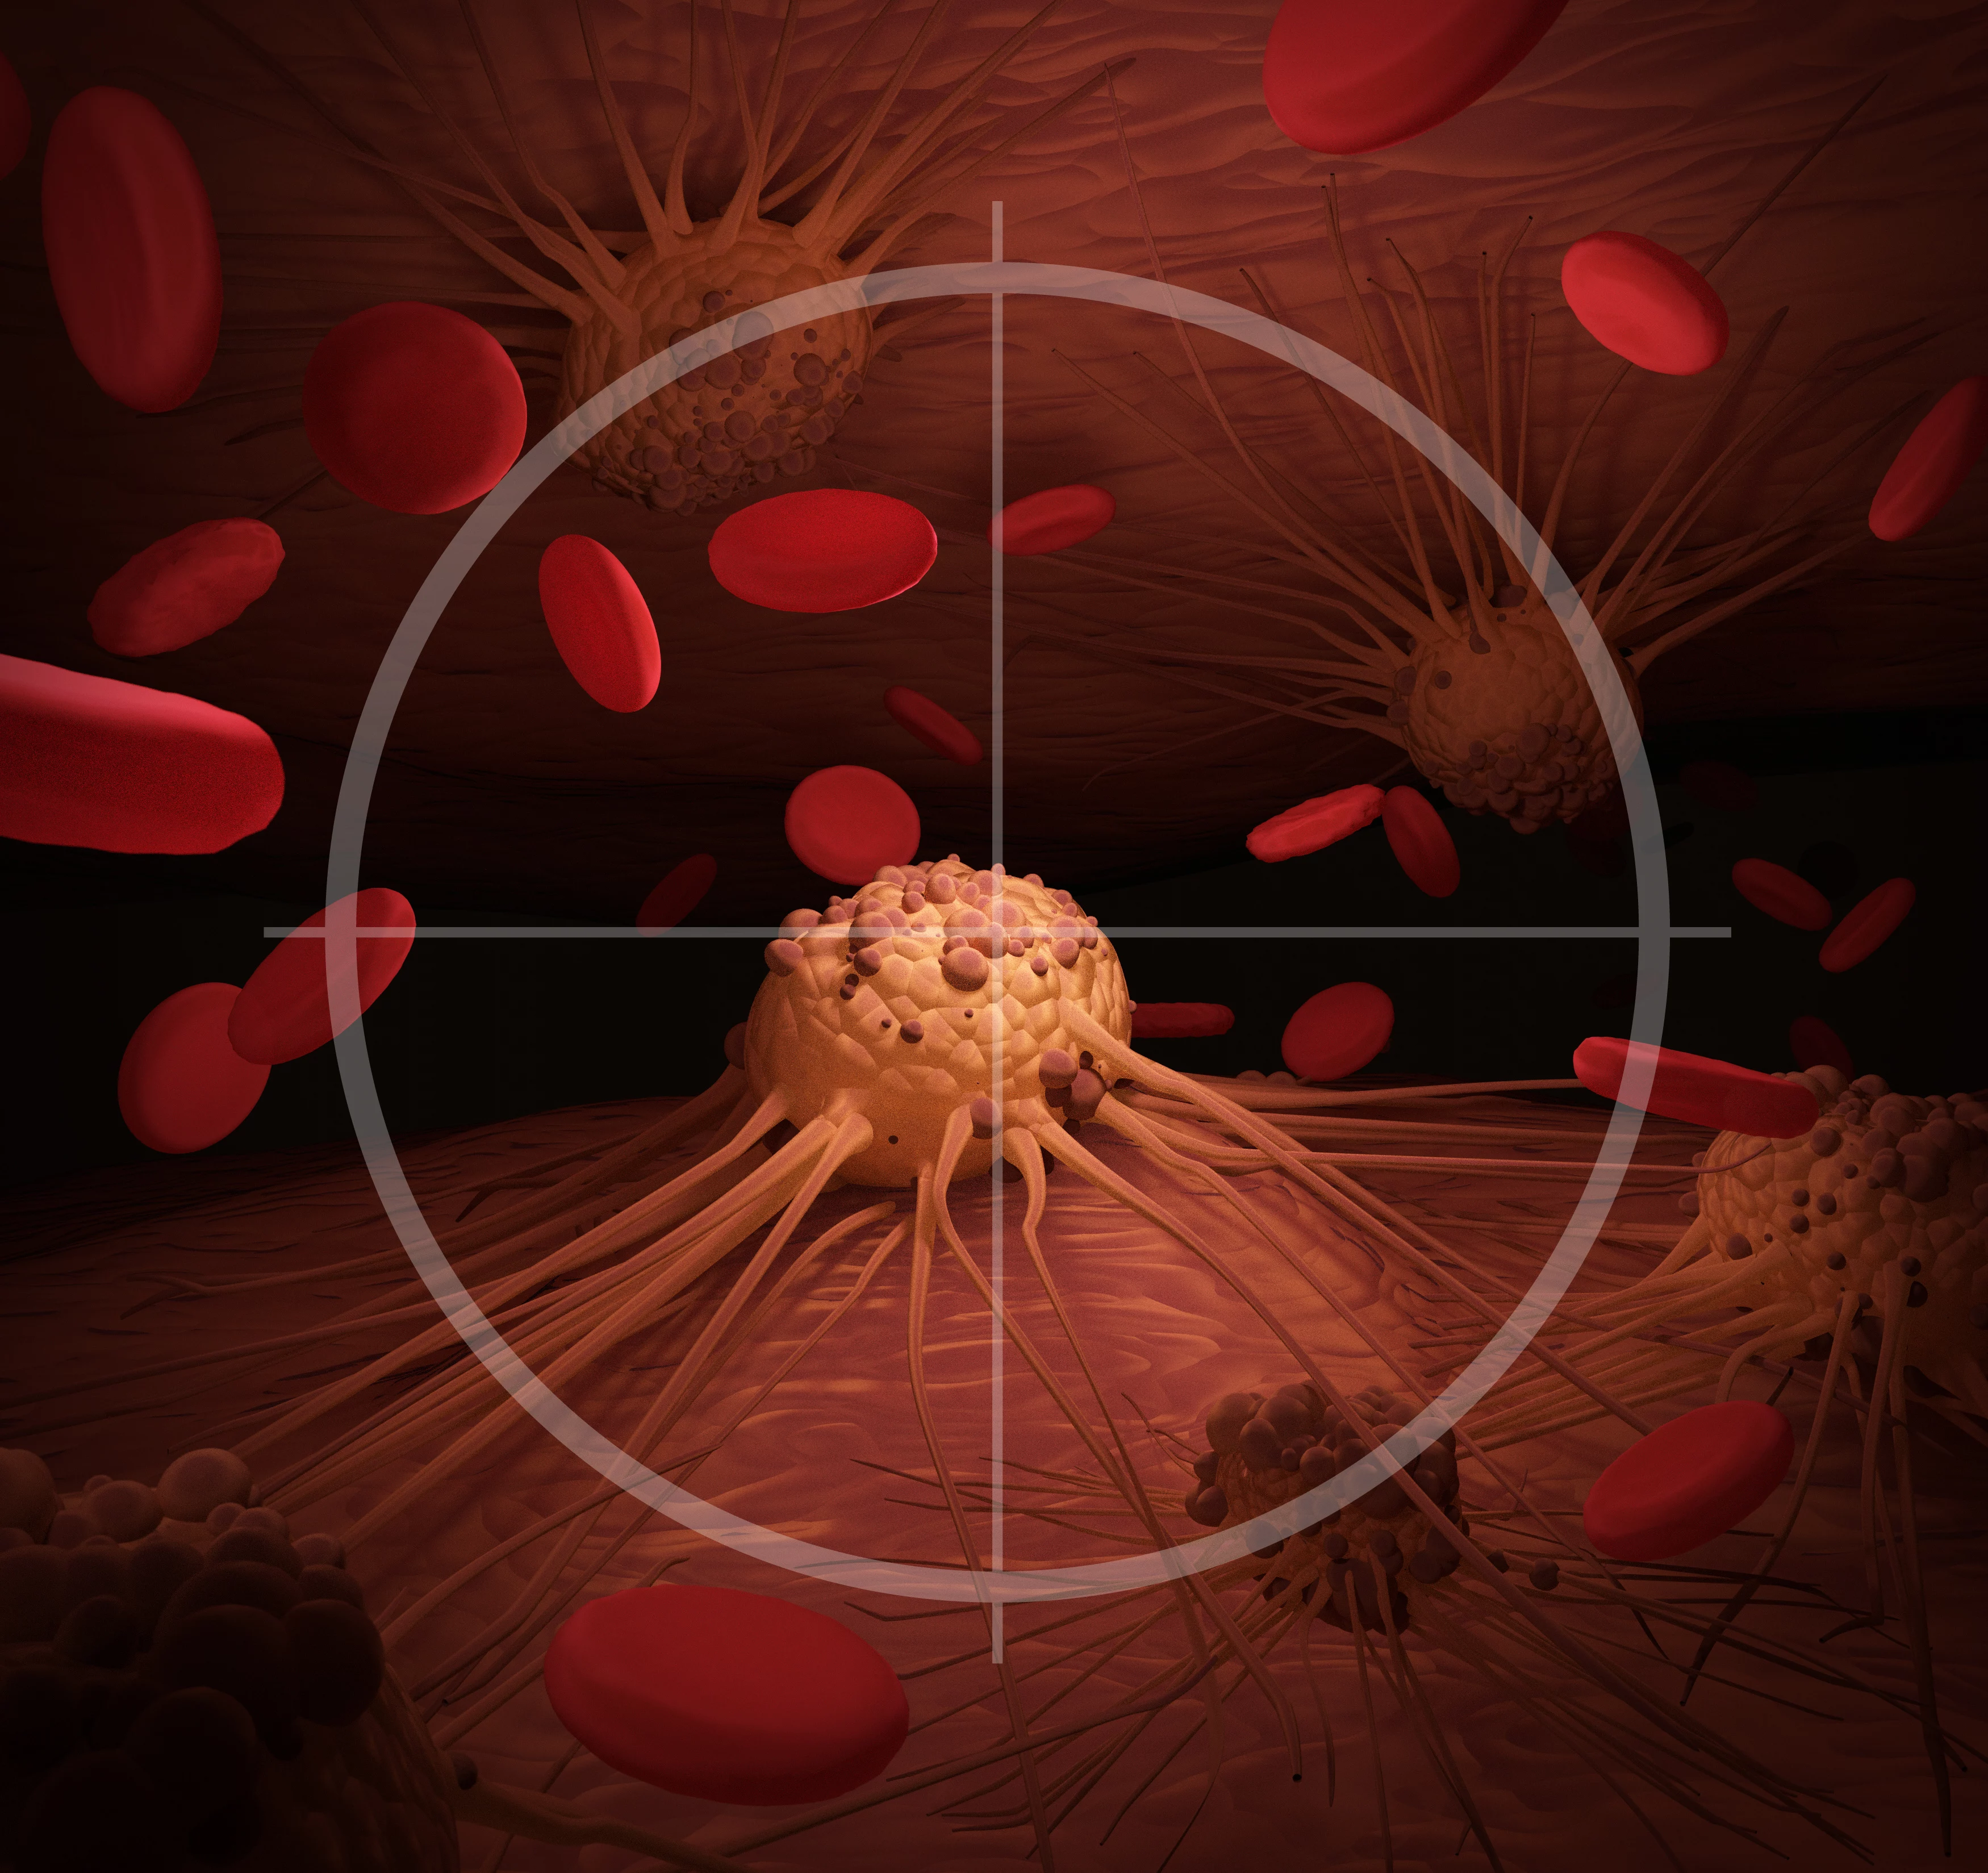 Blood Tests Can Detect Individual’s Resistance to Docetaxel for Prostate Cancer